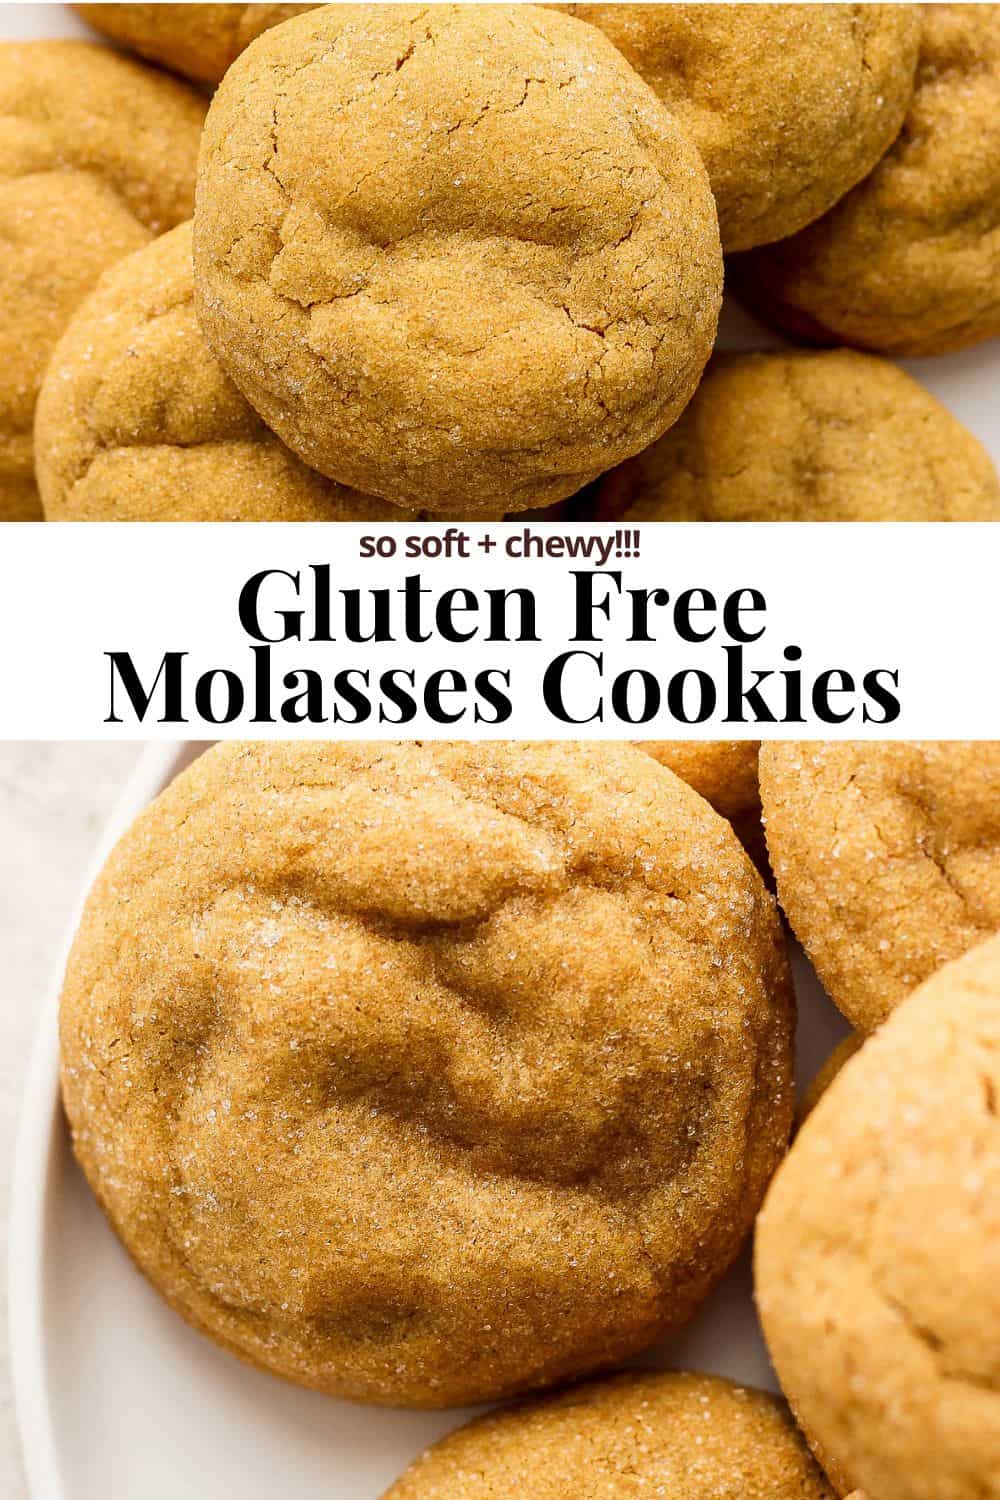 Pinterest image showing gluten free molasses cookies on a plate with the title "gluten free molasses cookies. so soft and chewy!!